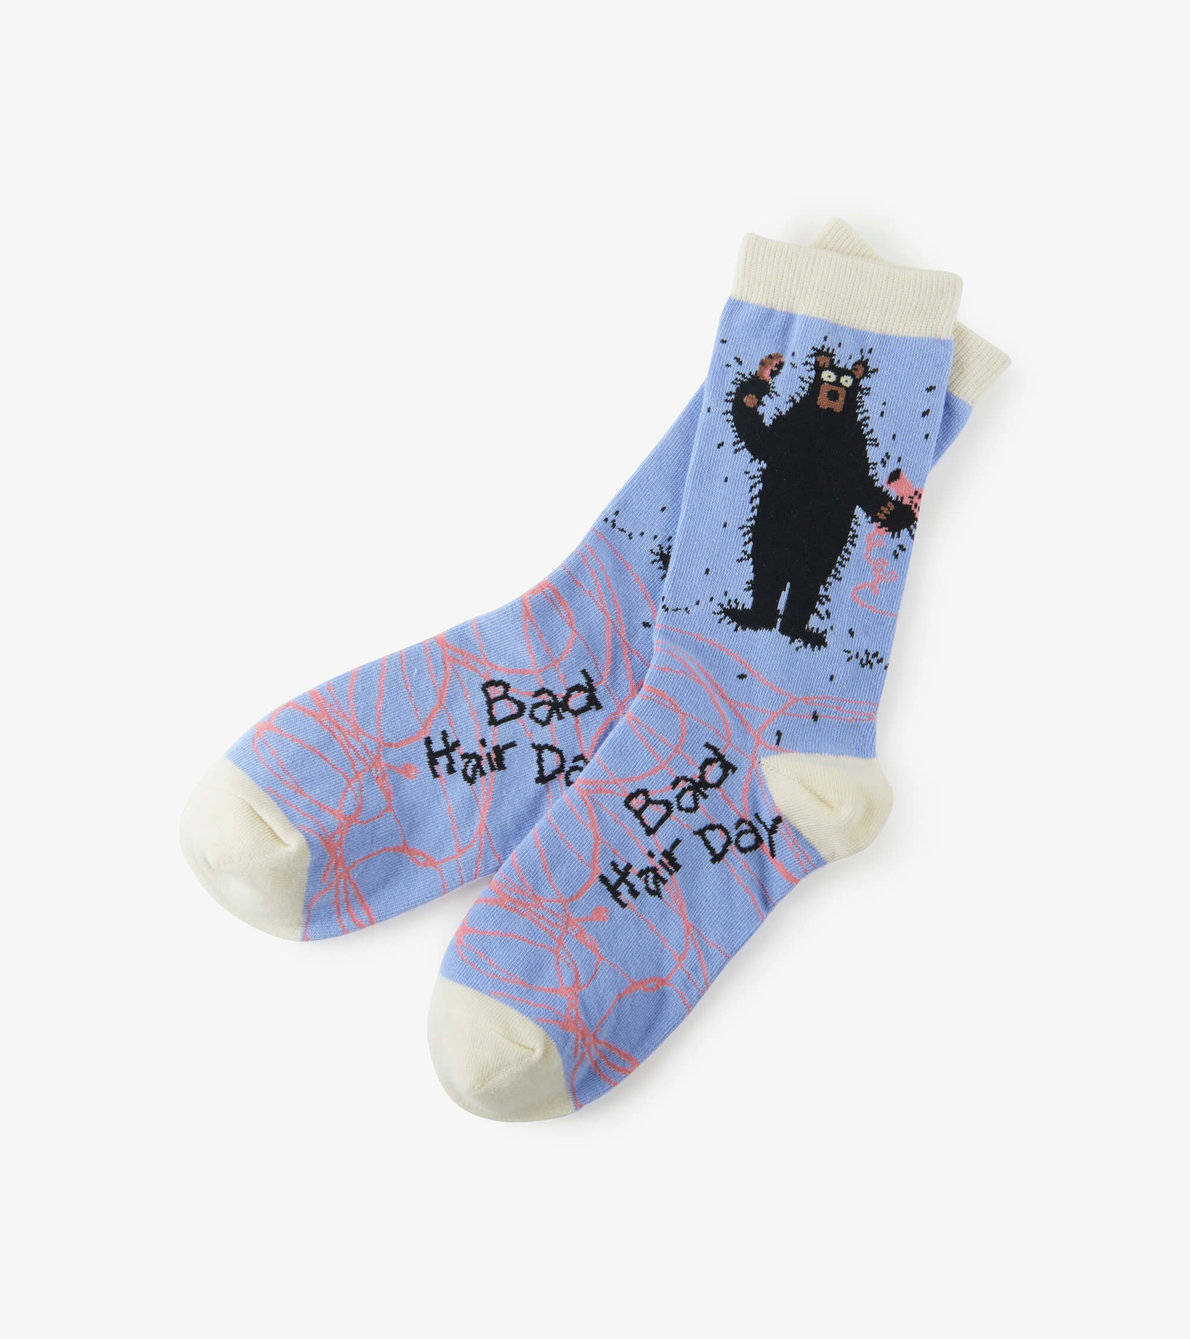 View larger image of Bad Hair Day Women's Crew Socks